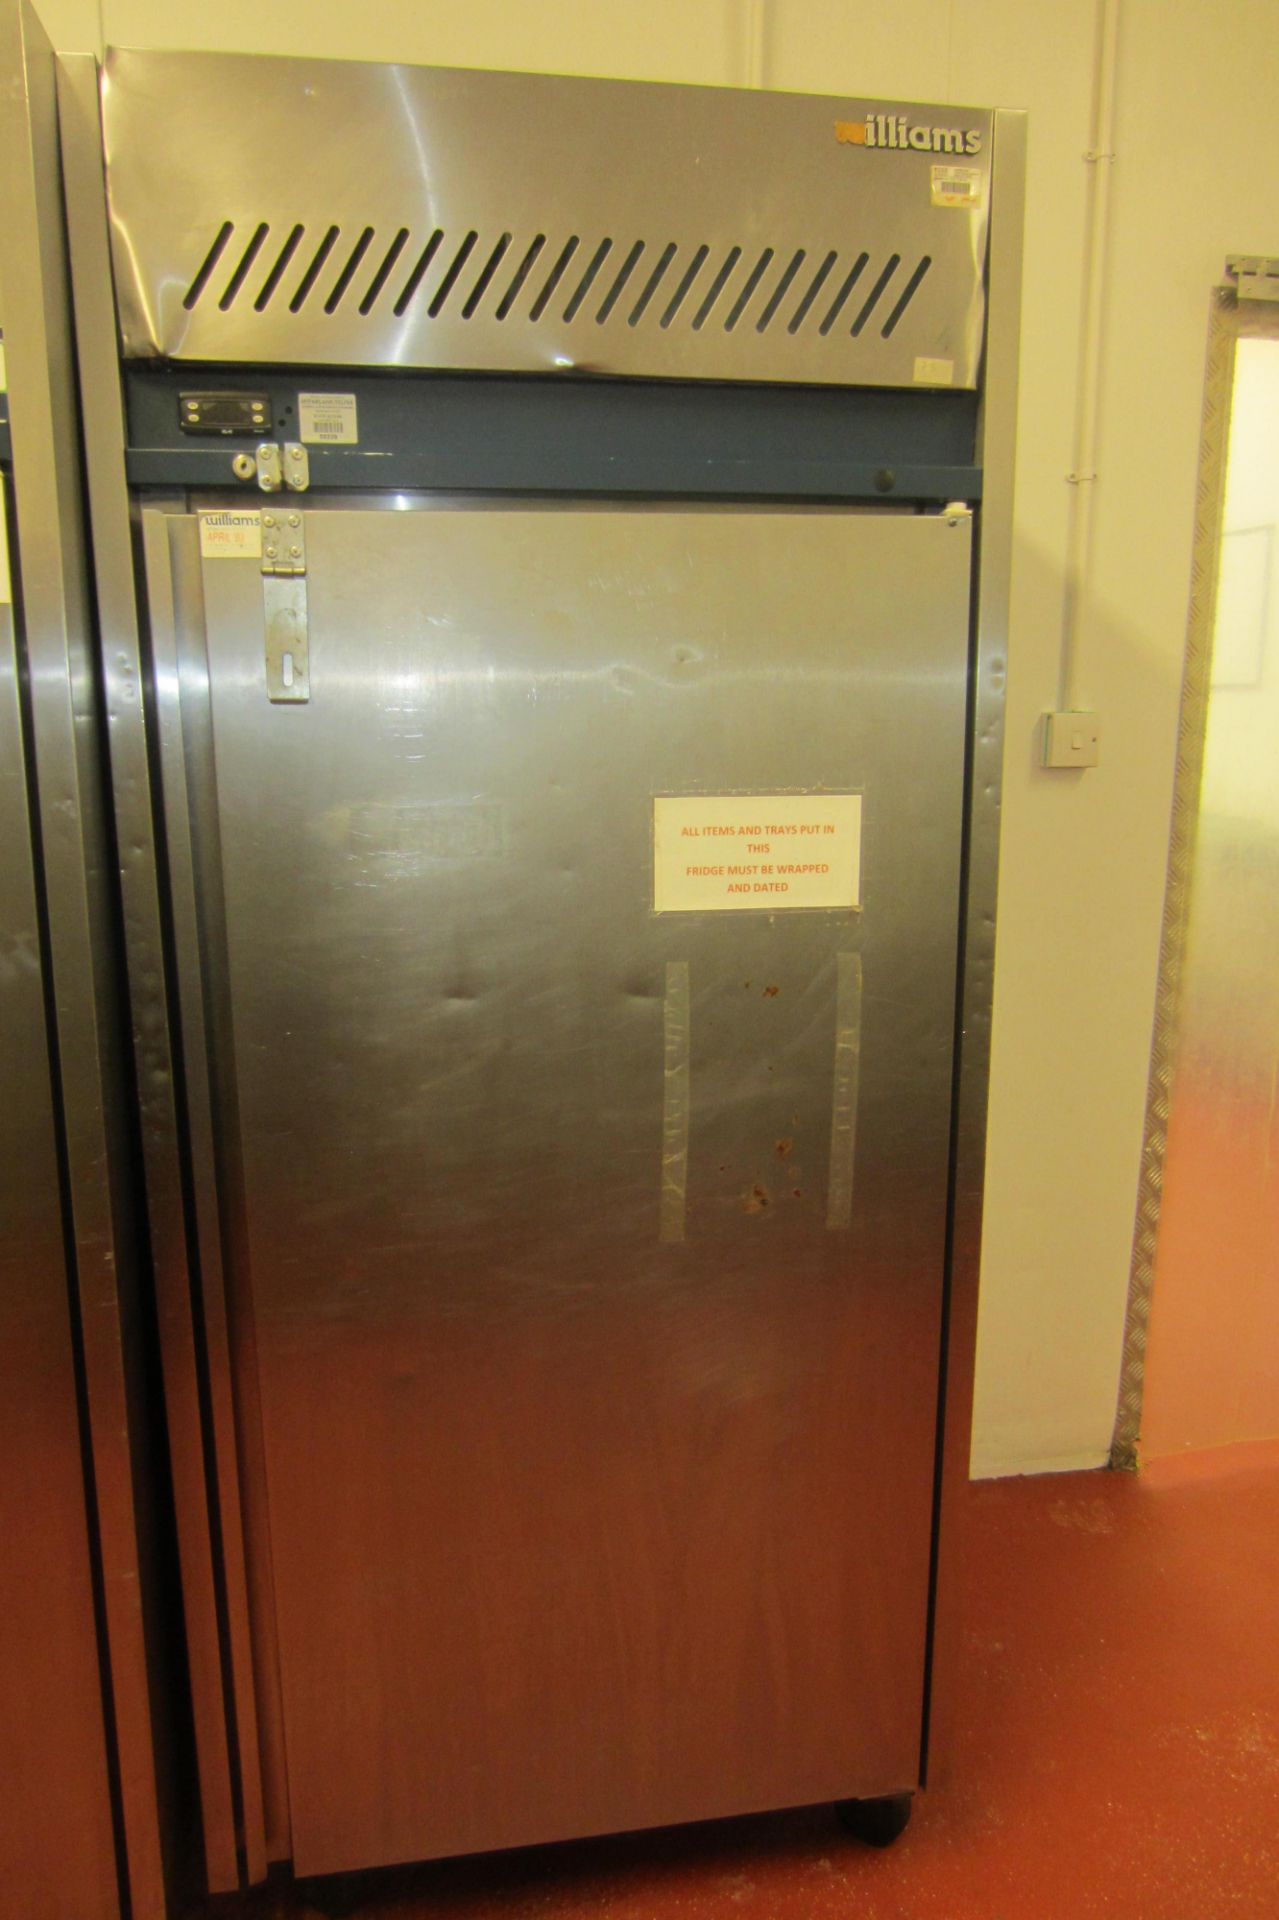 Williams Stainless Steel Upright Commercial Refrigerator - Image 3 of 3